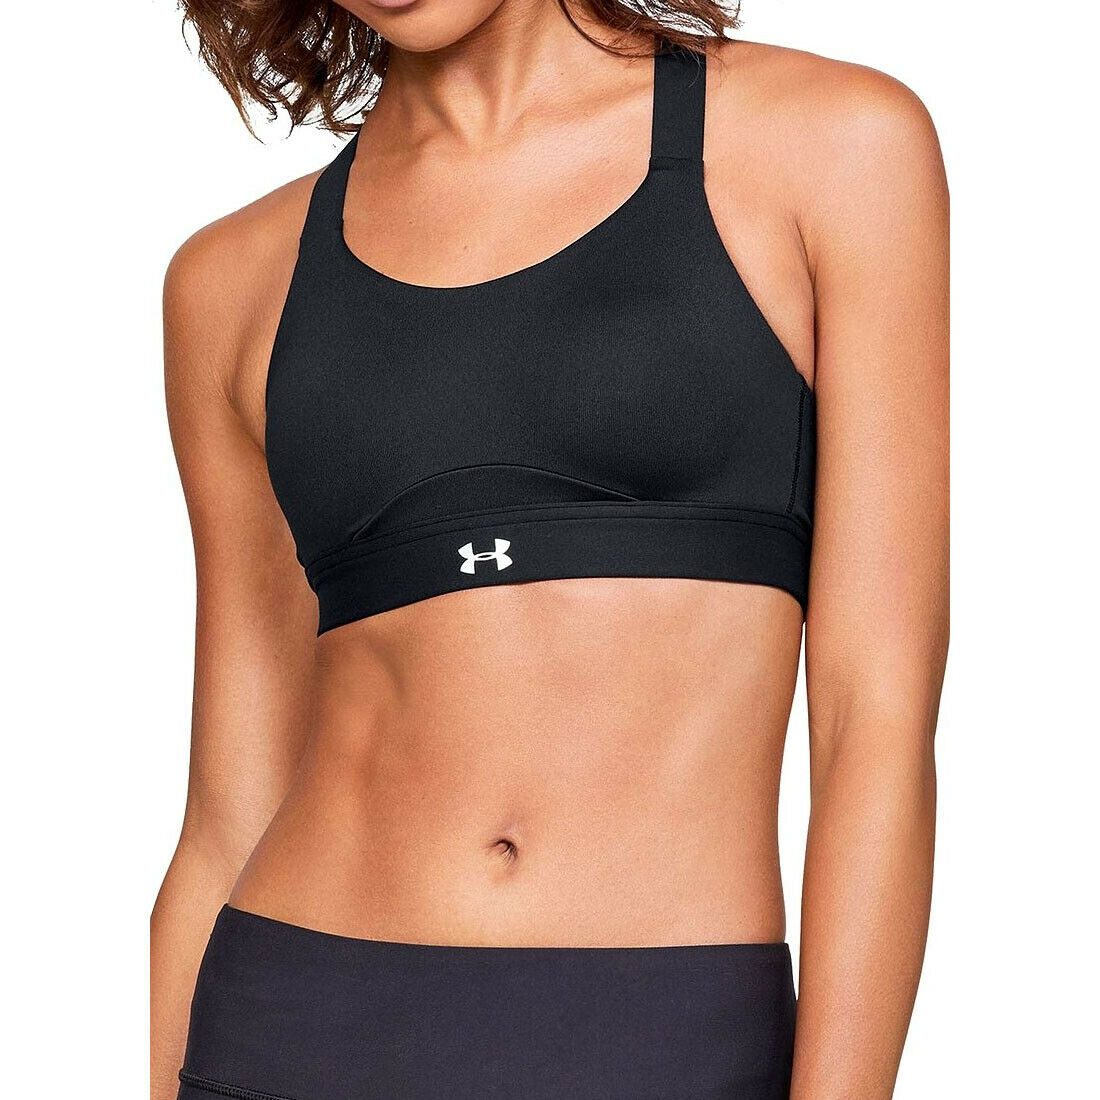 Under Armour High Impact Black Eclipse Sports Bra – Exclusive Sports